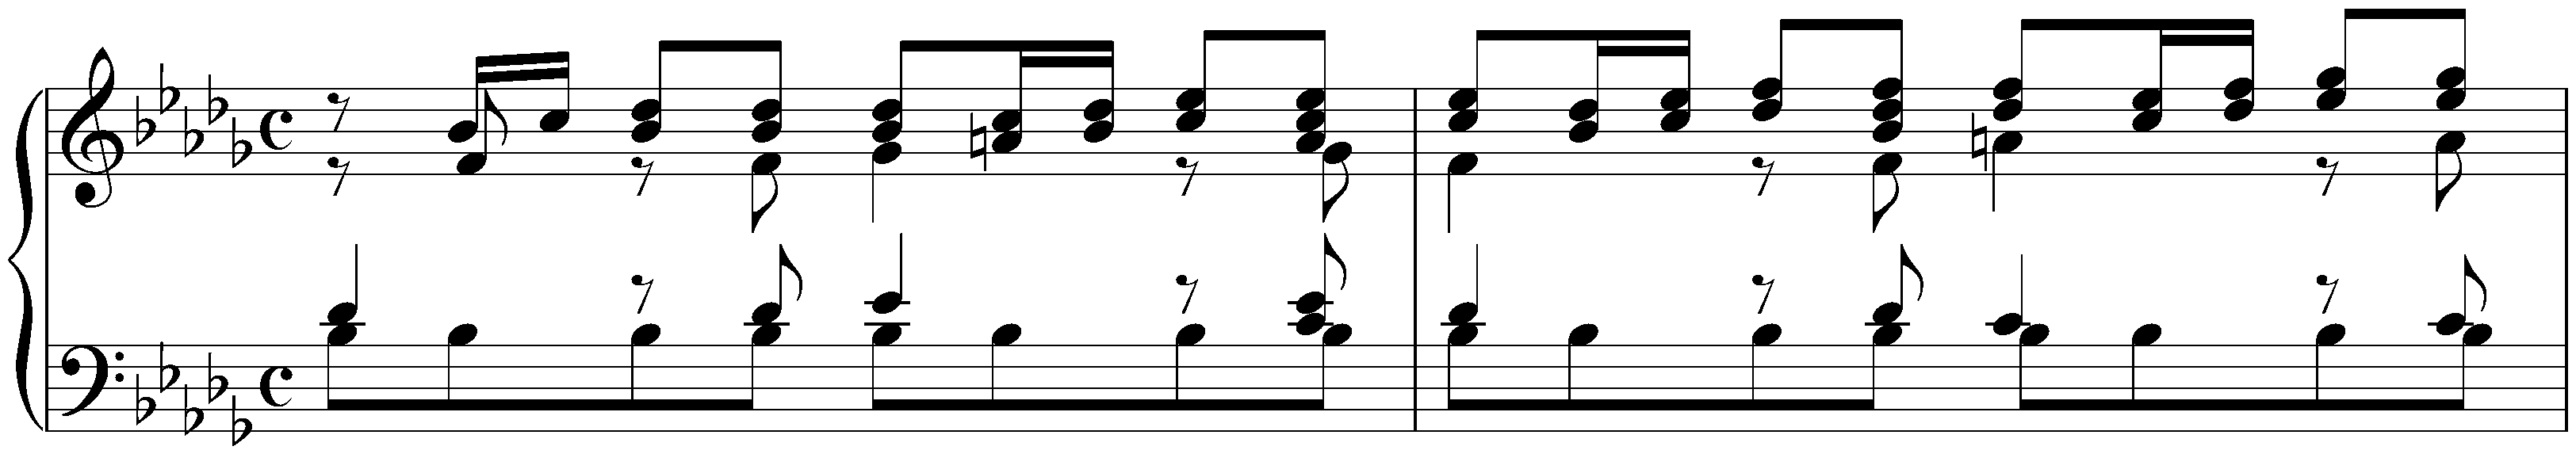 The Well-Tempered Clavier, Book 1, BWV 846–869; 22. B-flat minor, BWV 867, Prelude